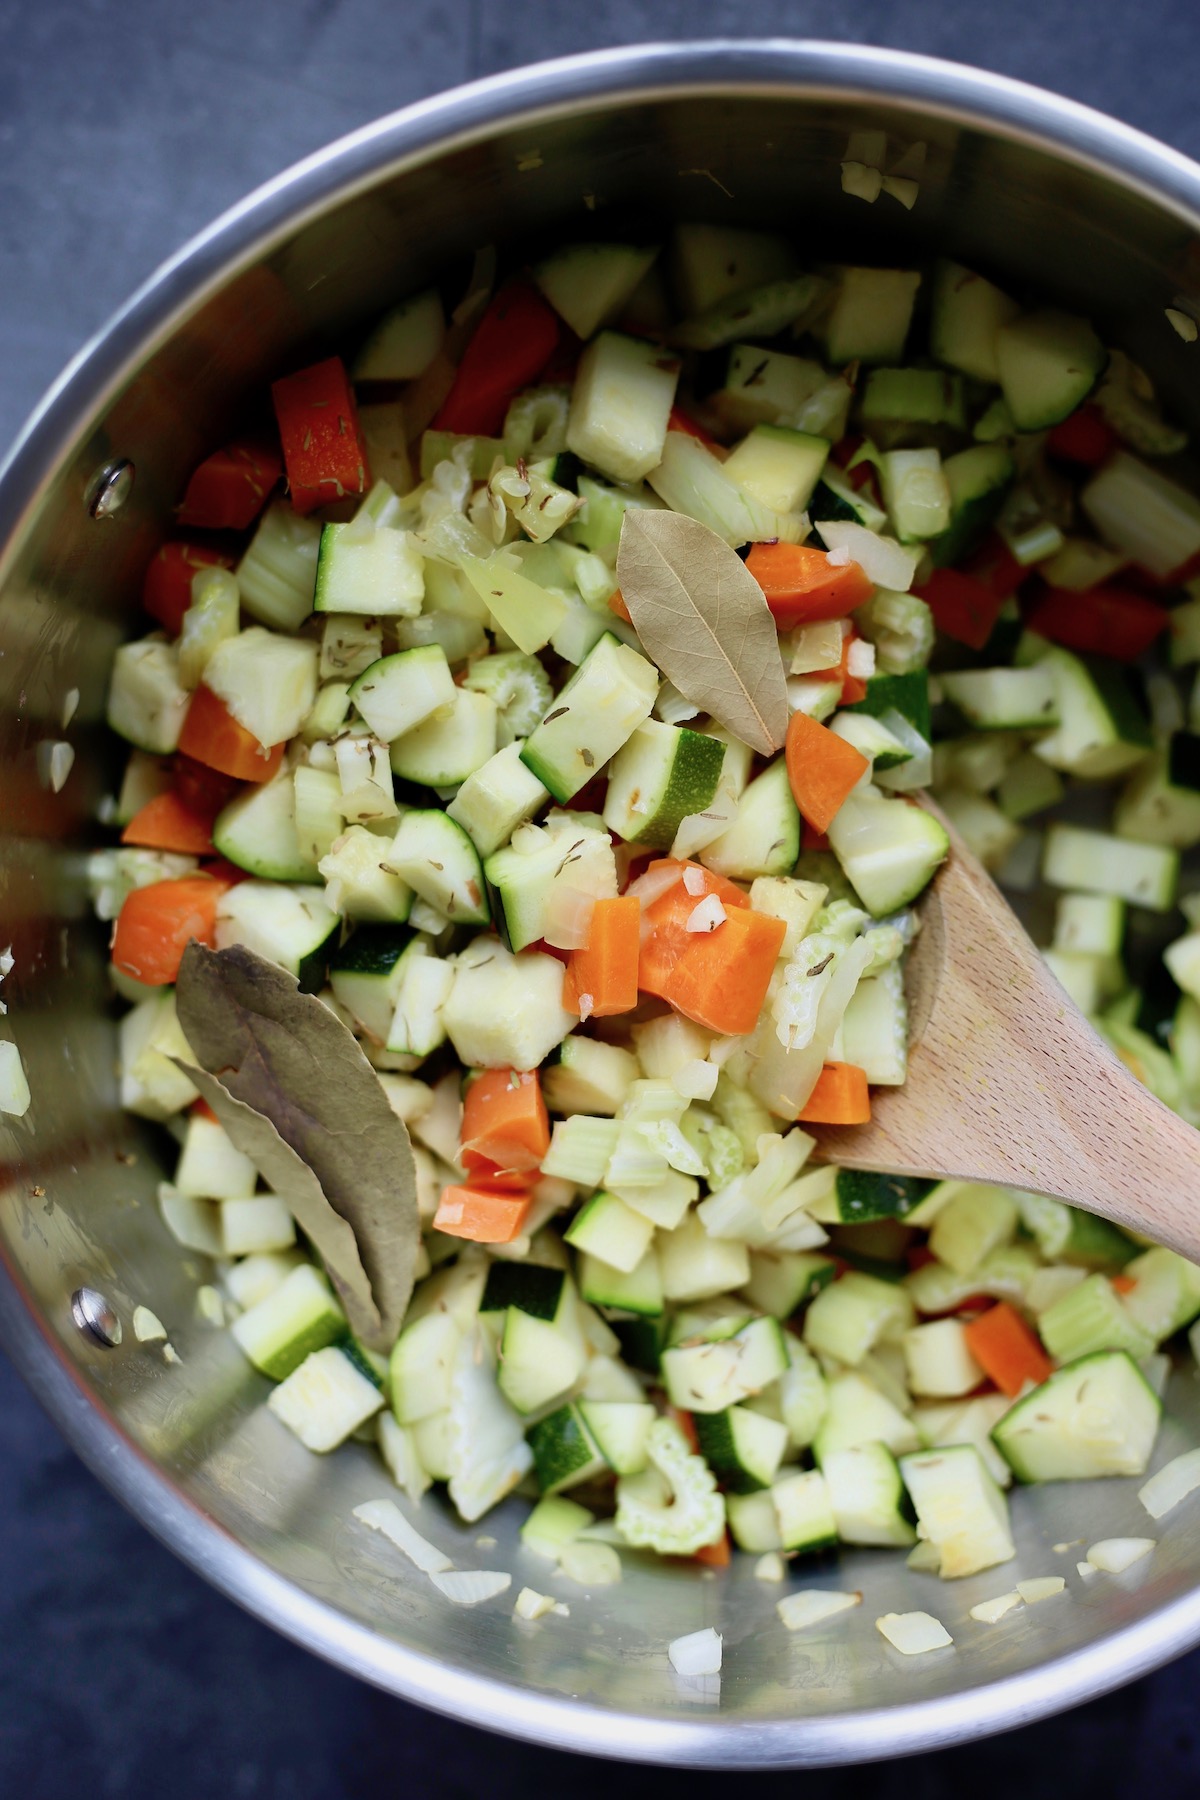 Chopped up zucchini and carrots in a silver sauce pan with bay leaves and thyme sprinkled on top.